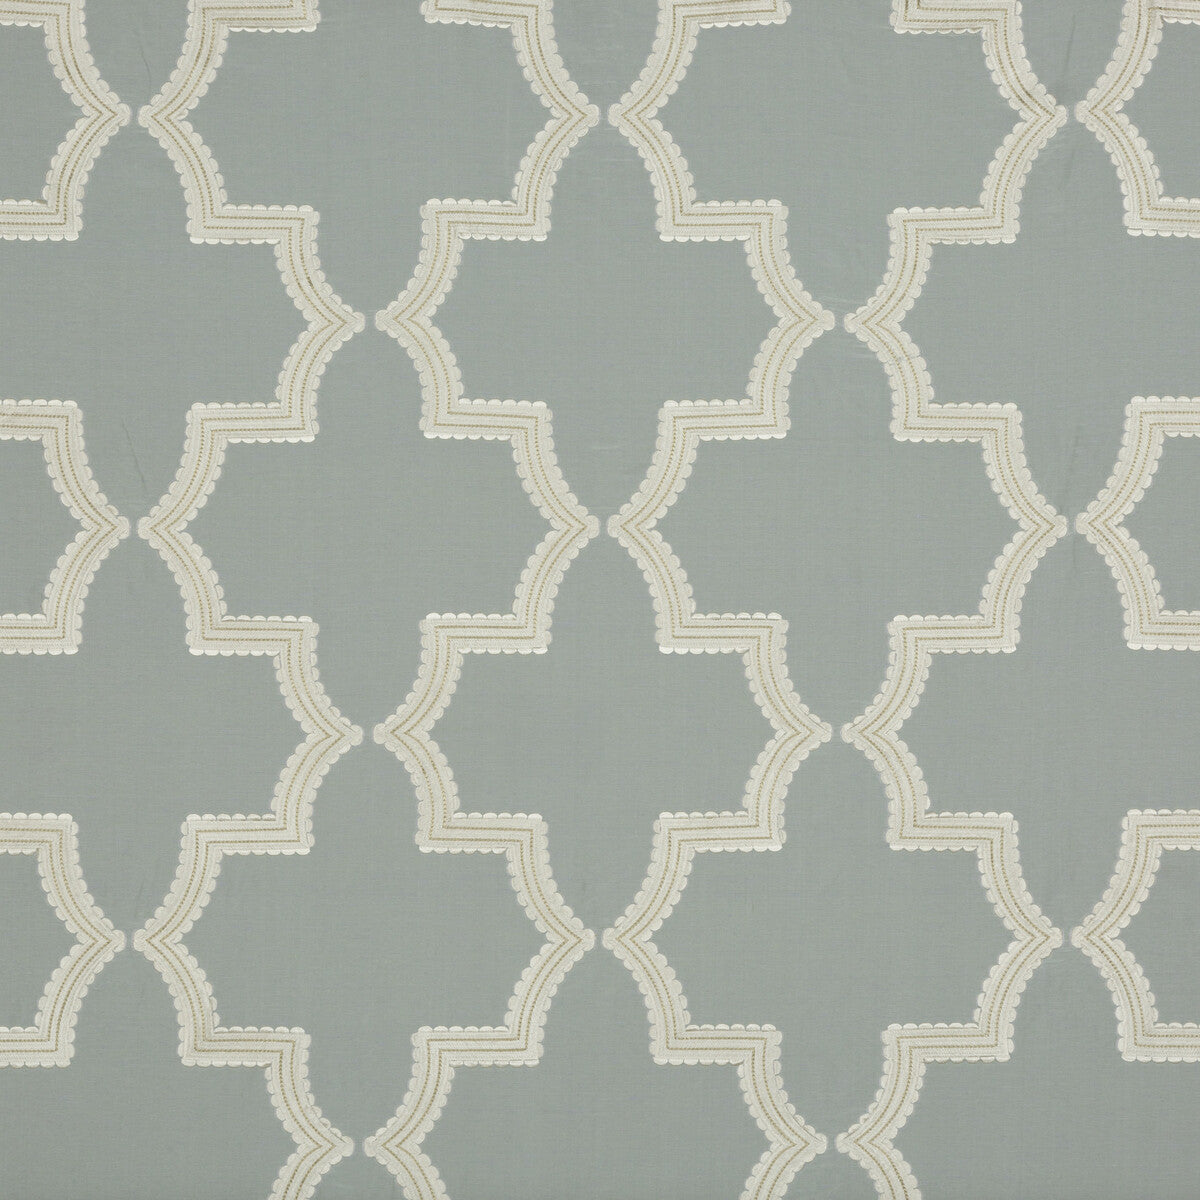 Coppelia fabric in teal color - pattern BF10601.615.0 - by G P &amp; J Baker in the Cosmopolitan collection